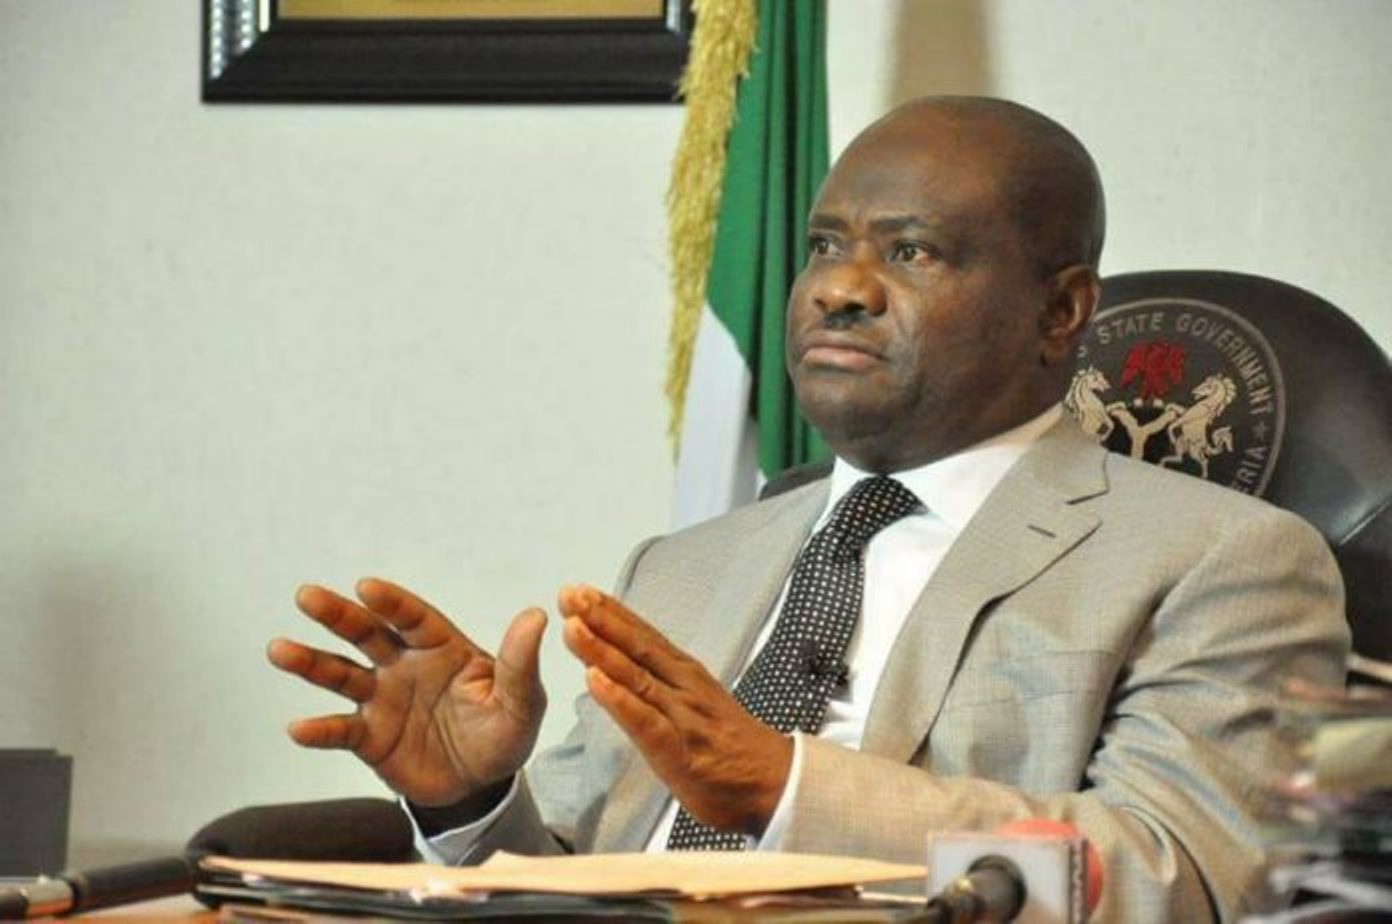 Governor Wike declares support for indigenes who invest in Rivers State